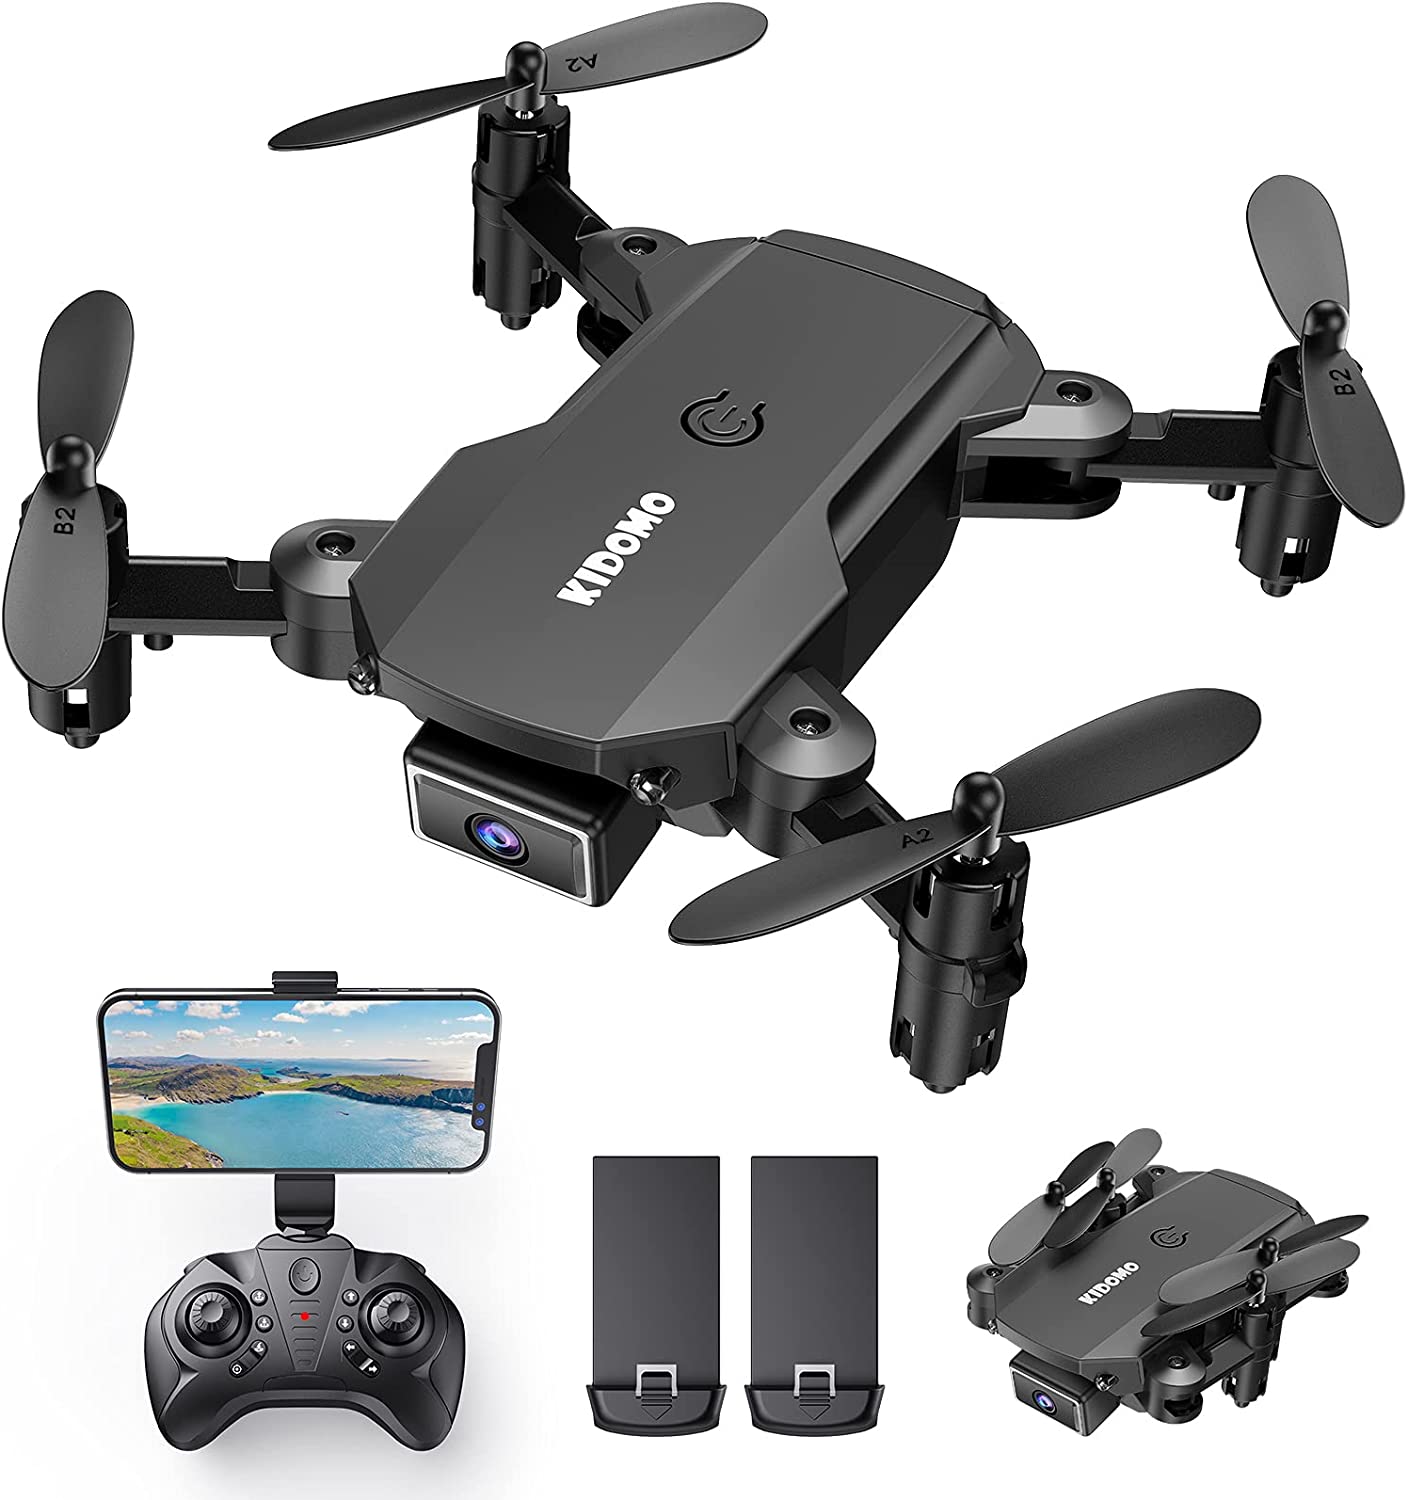 KIDOMO F02 Mini Drone with Camera – 1080P FPV Foldable Drone Gifts for Beginner Kids Support Voice/Gesture Control, 3D Flips, Headless Mode, One Key Start and 2 Batteries, BLACK